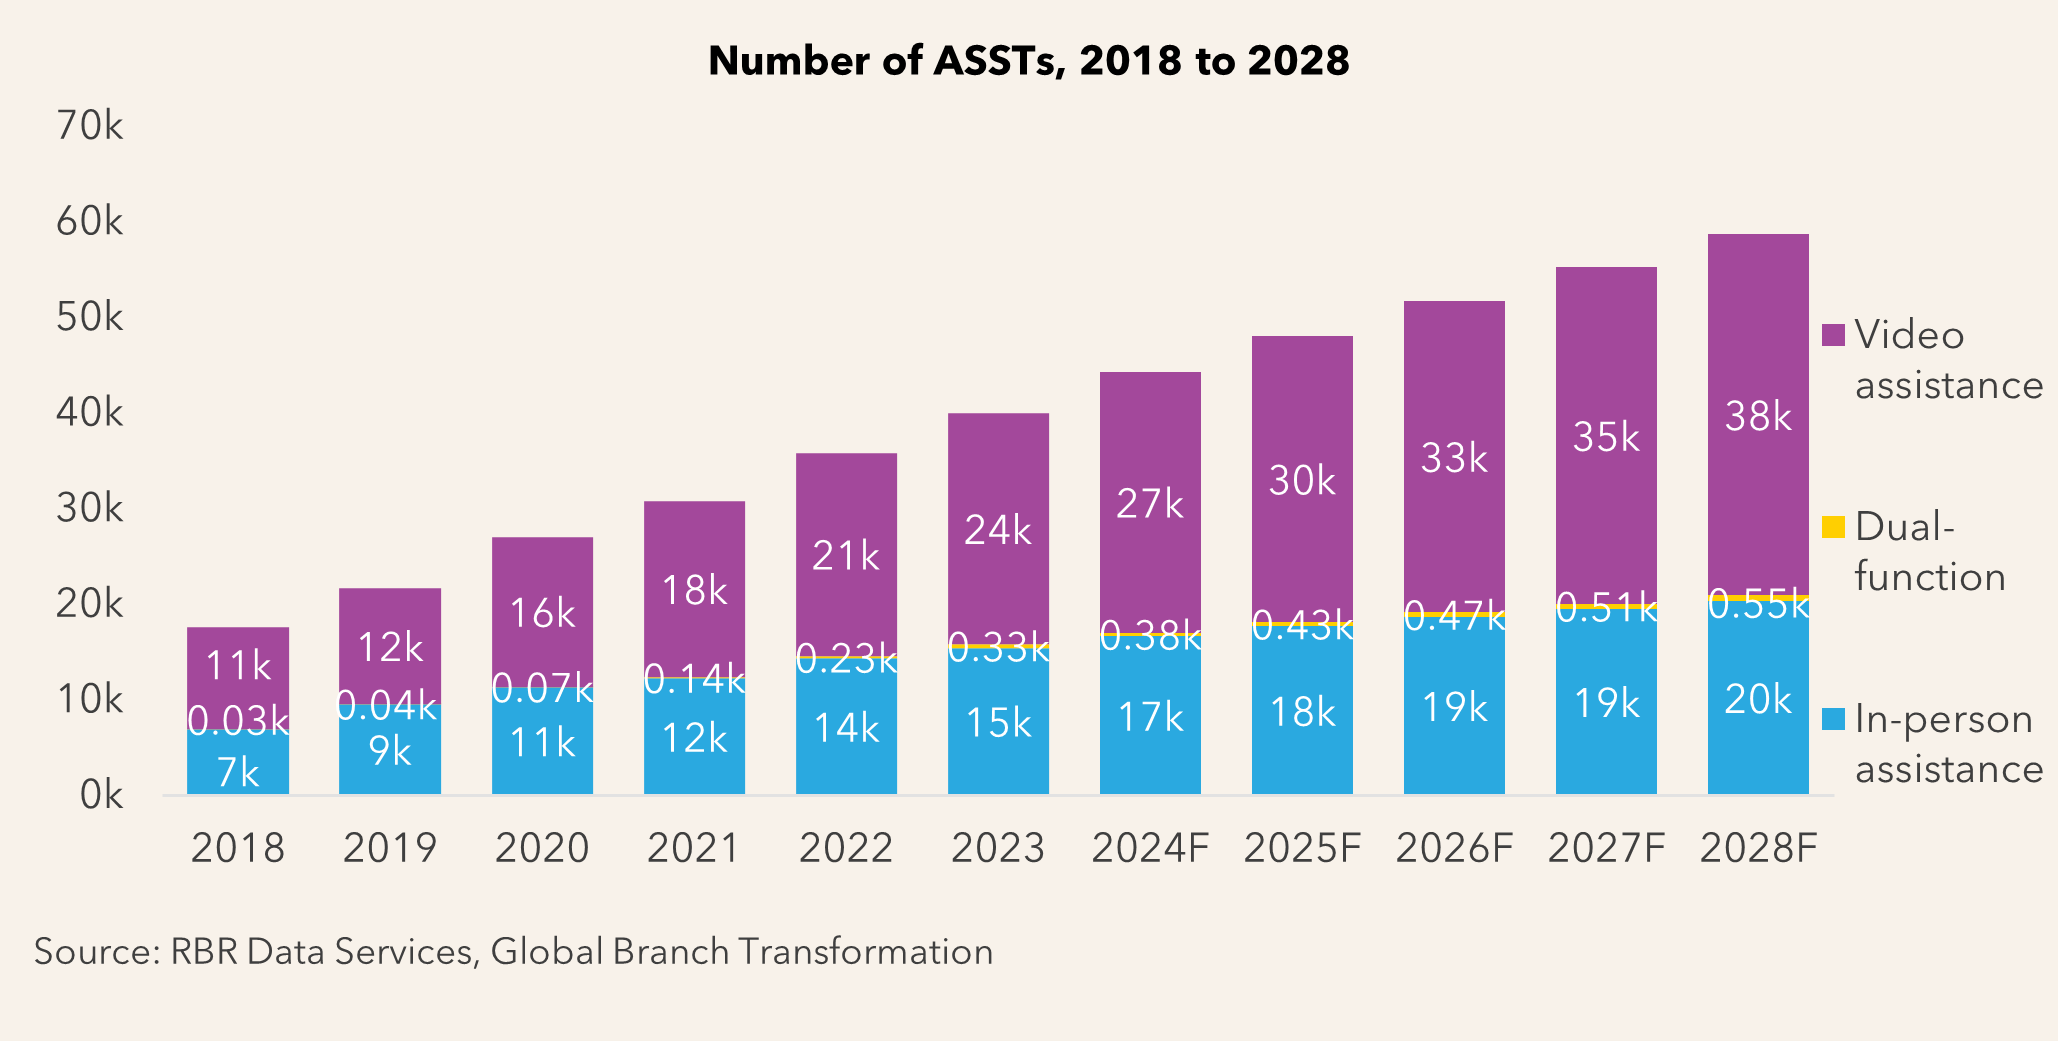 chart displays number of ASSTs from 2018 to 2028